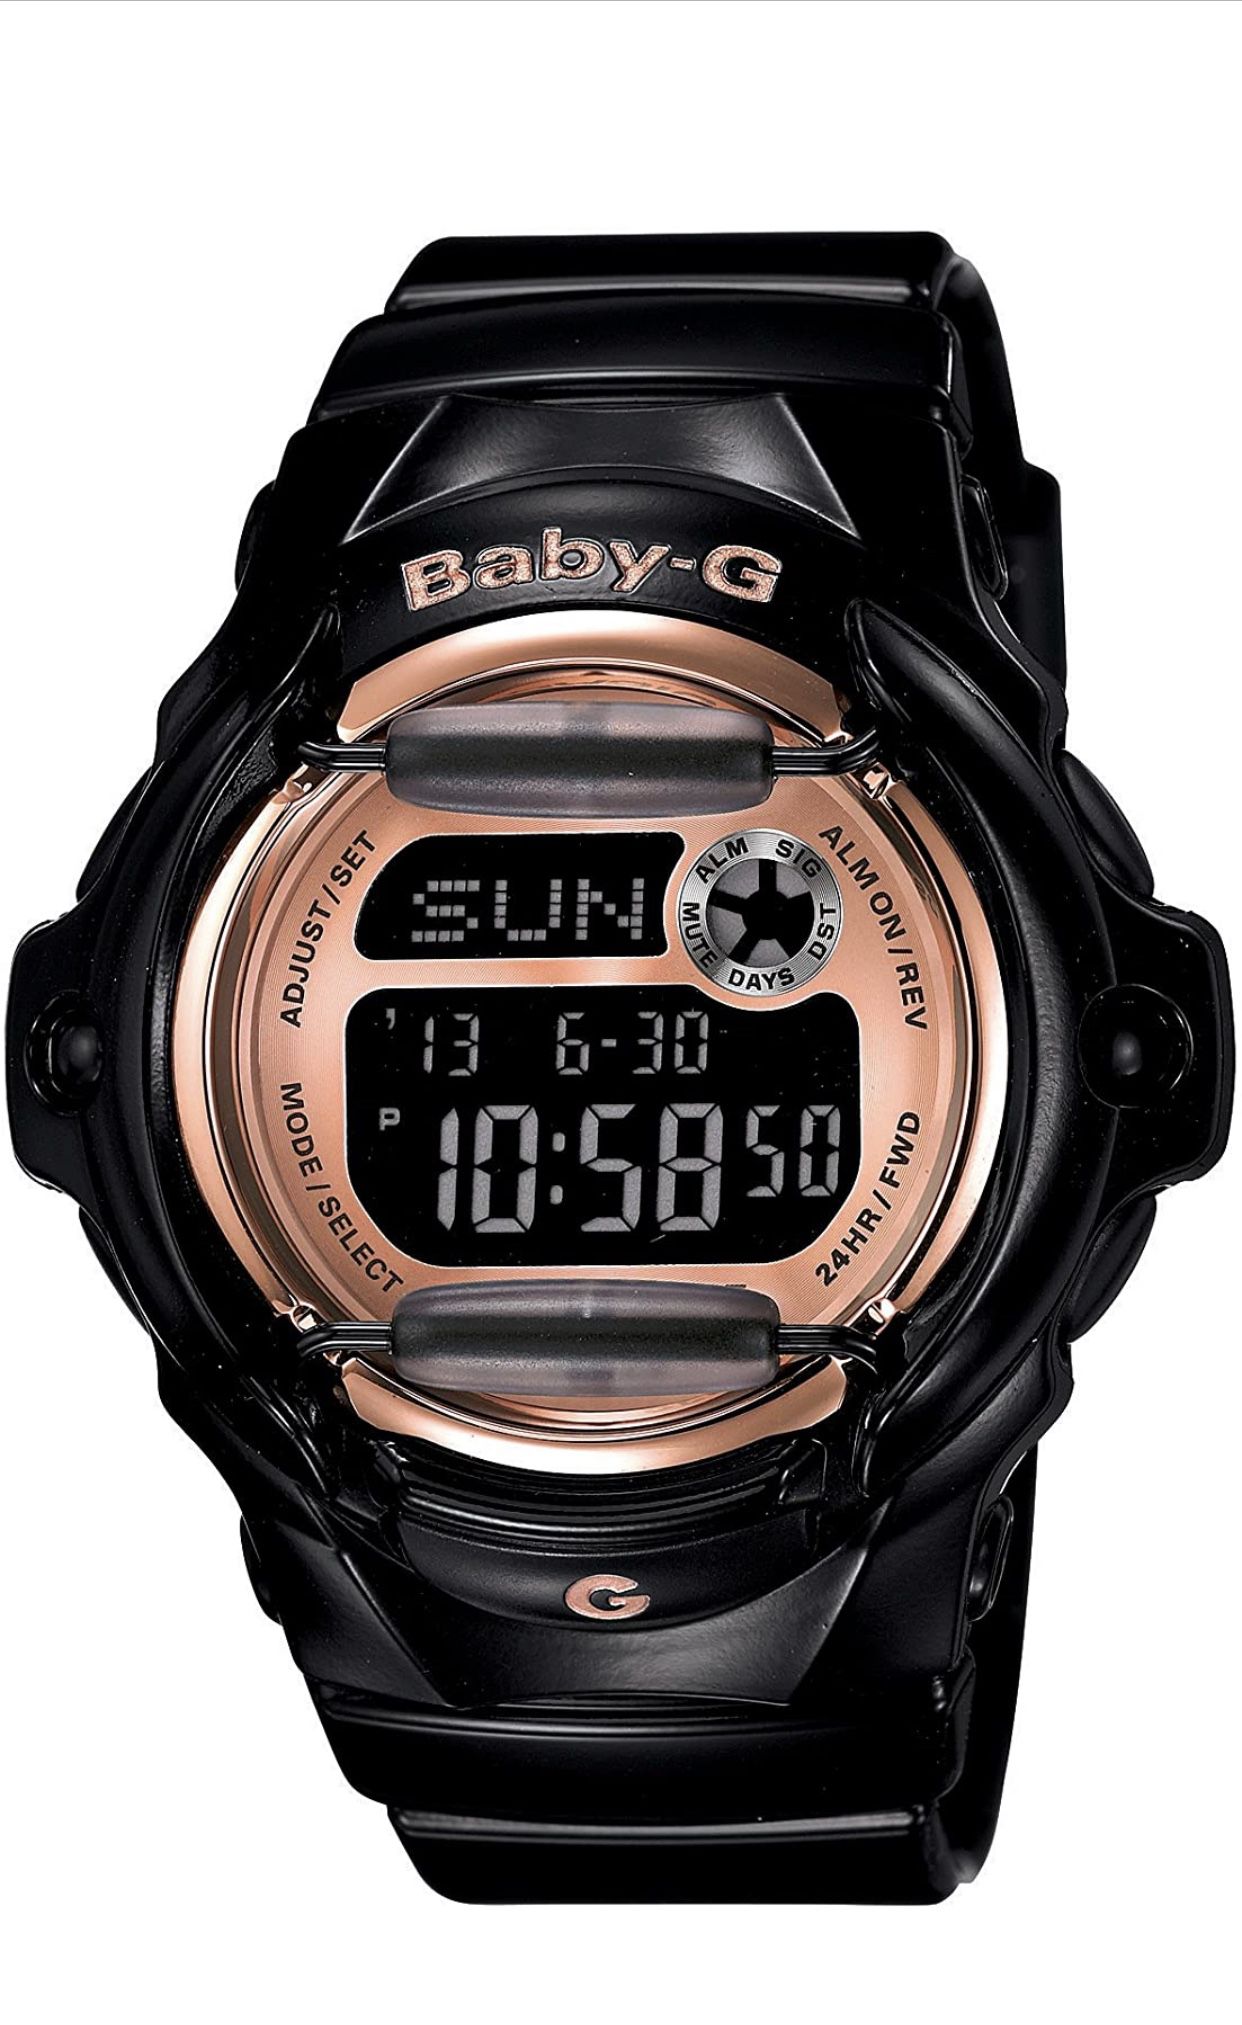 New Baby-G G-Shock Watch - Black With Rose Gold Face